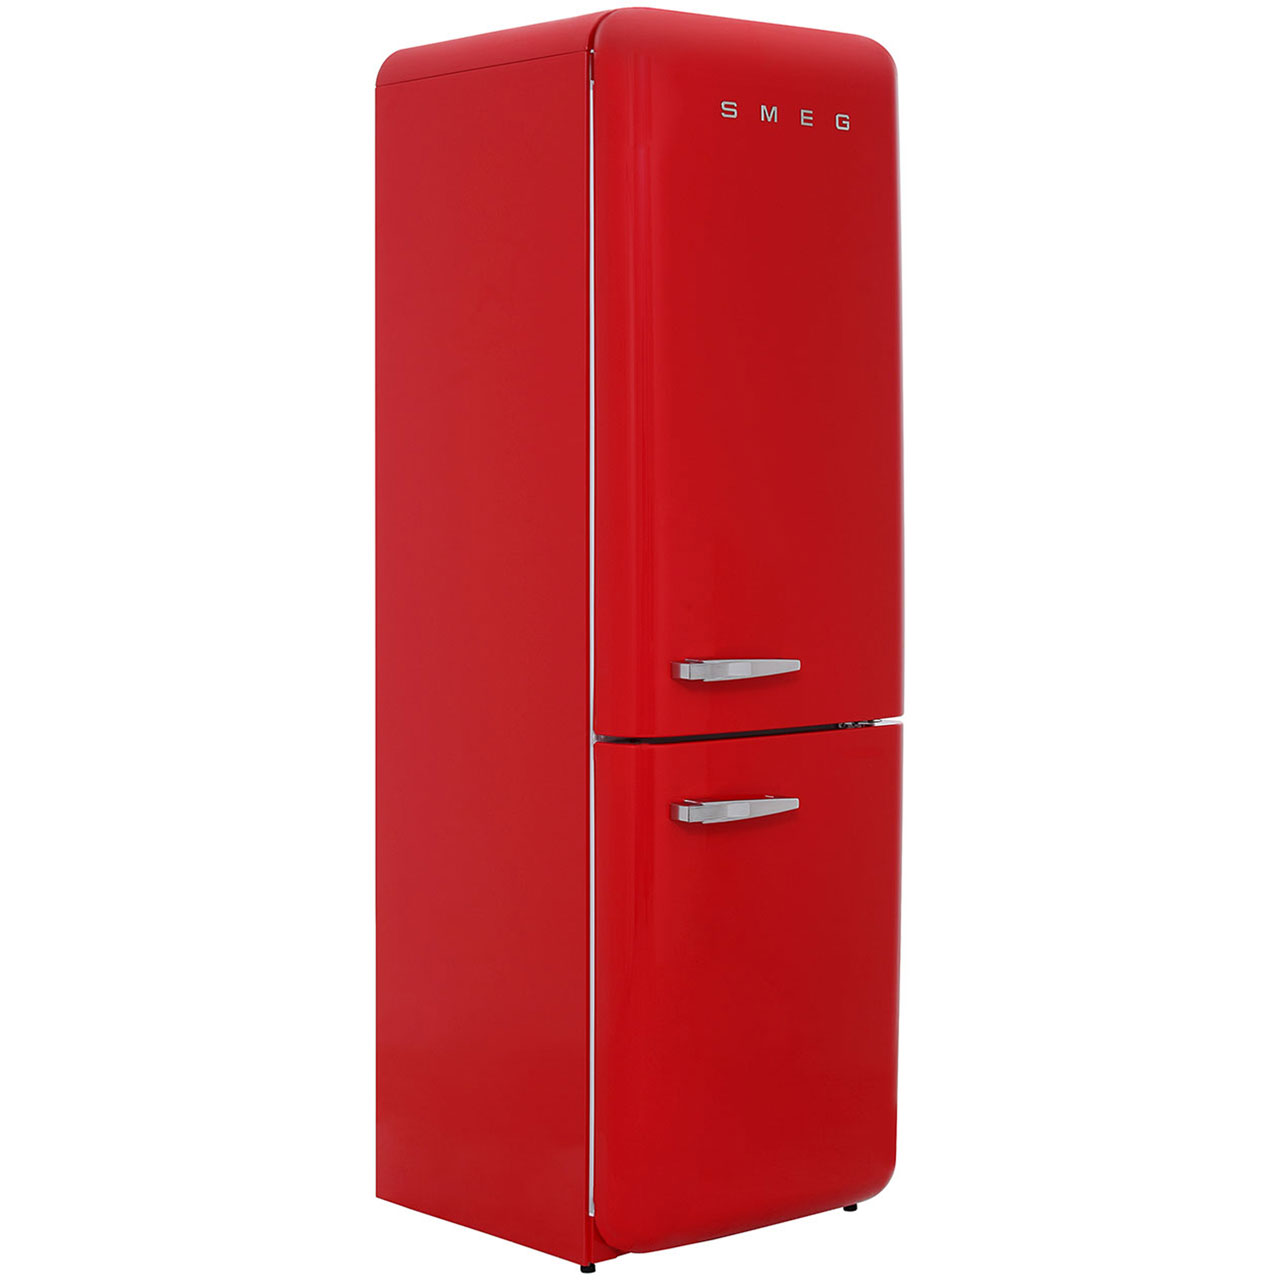 Smeg Right Hand Hinge FAB32RNR Free Standing Fridge Freezer Frost Free in Red